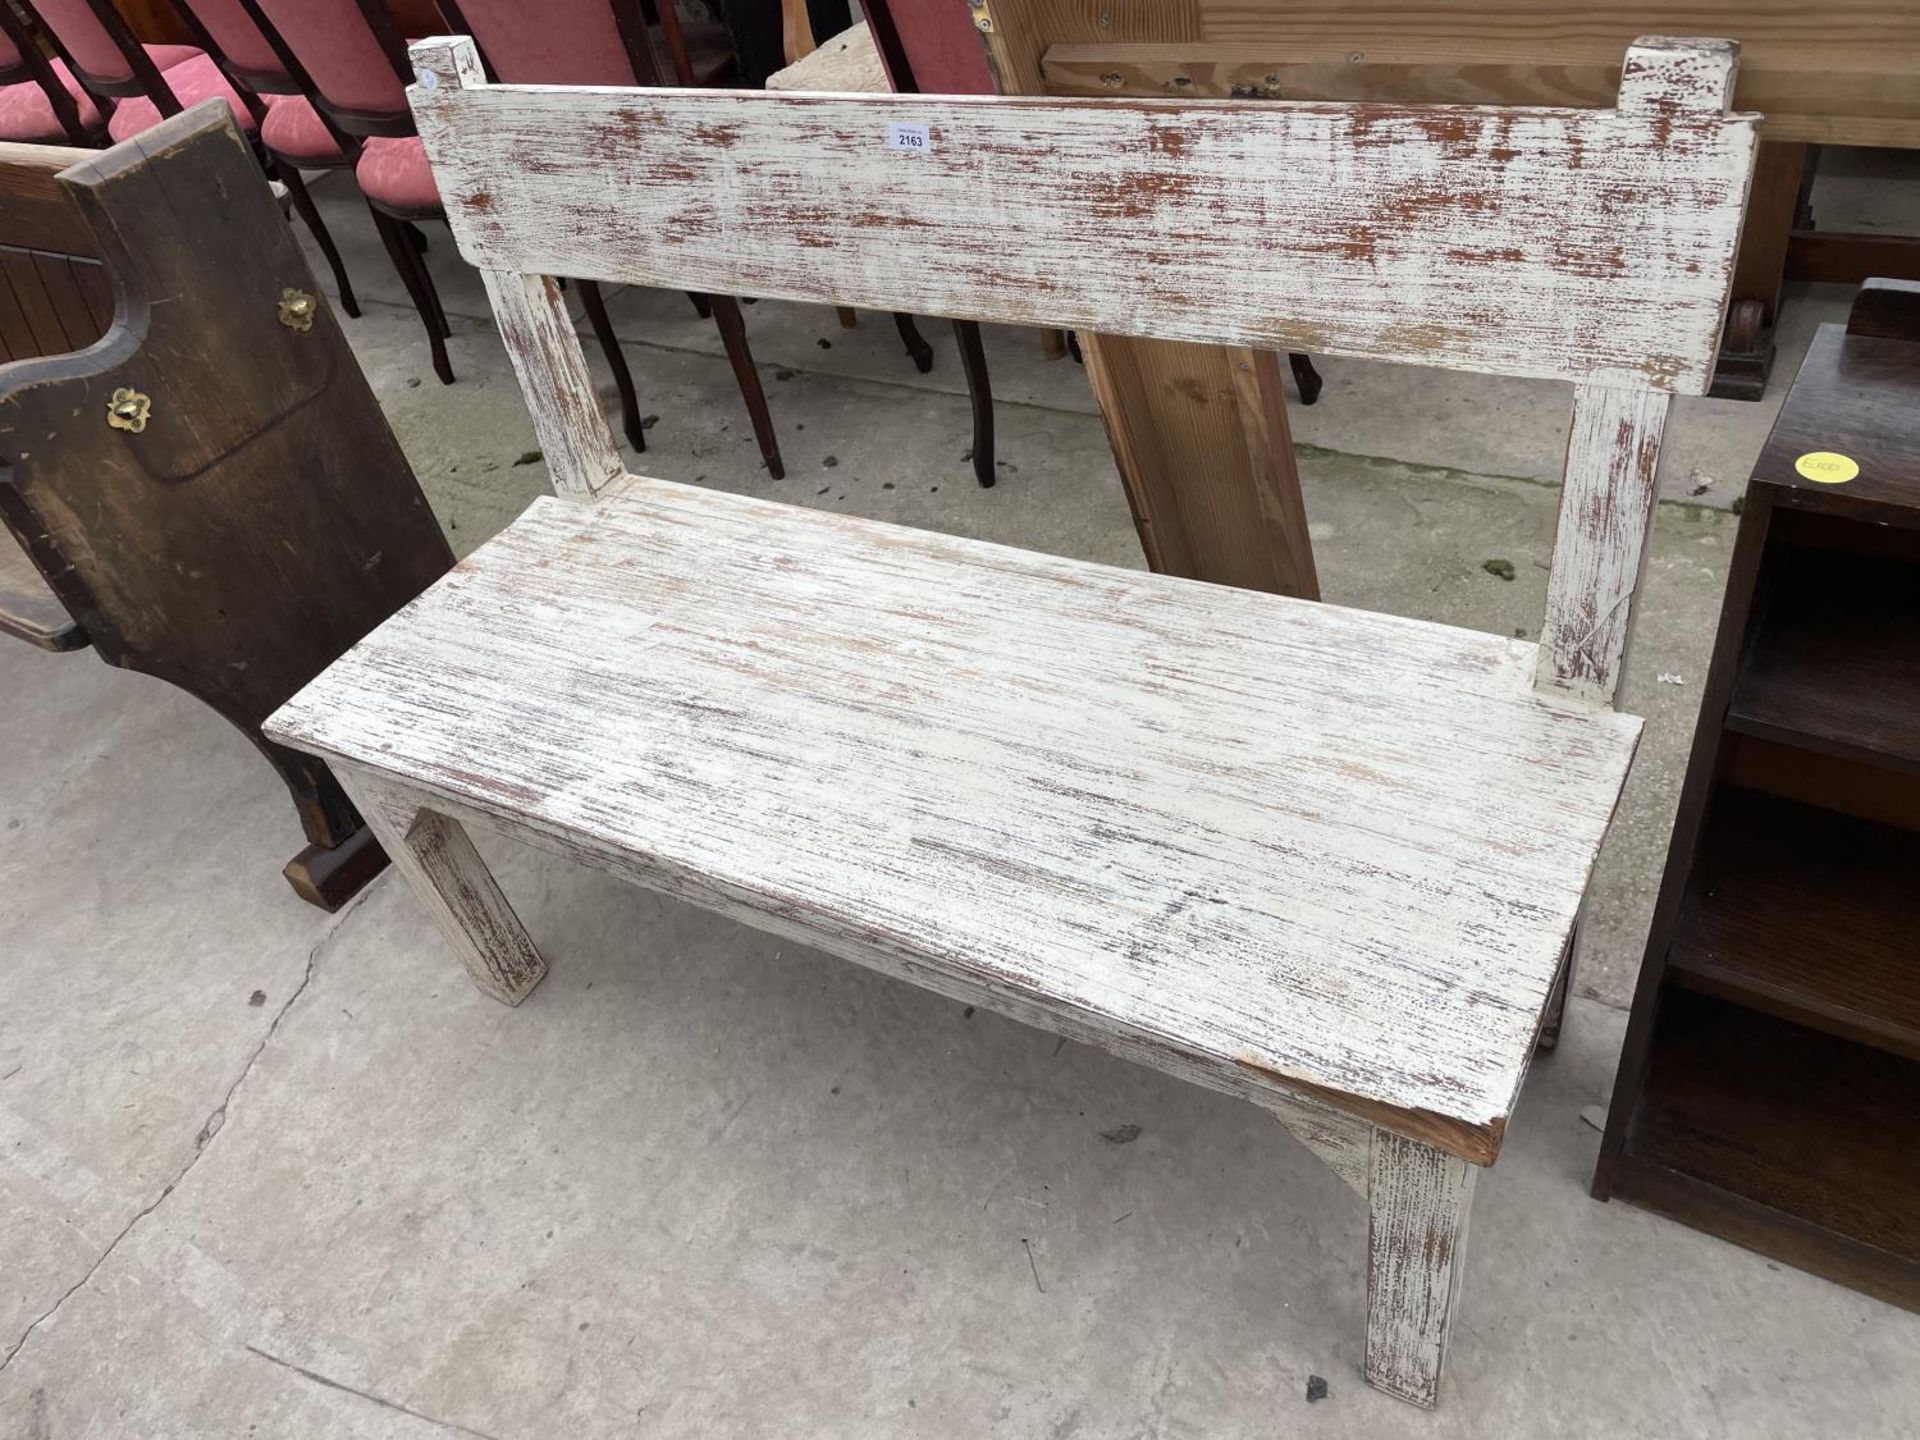 A SHABBY CHIC PAINTED BENCH